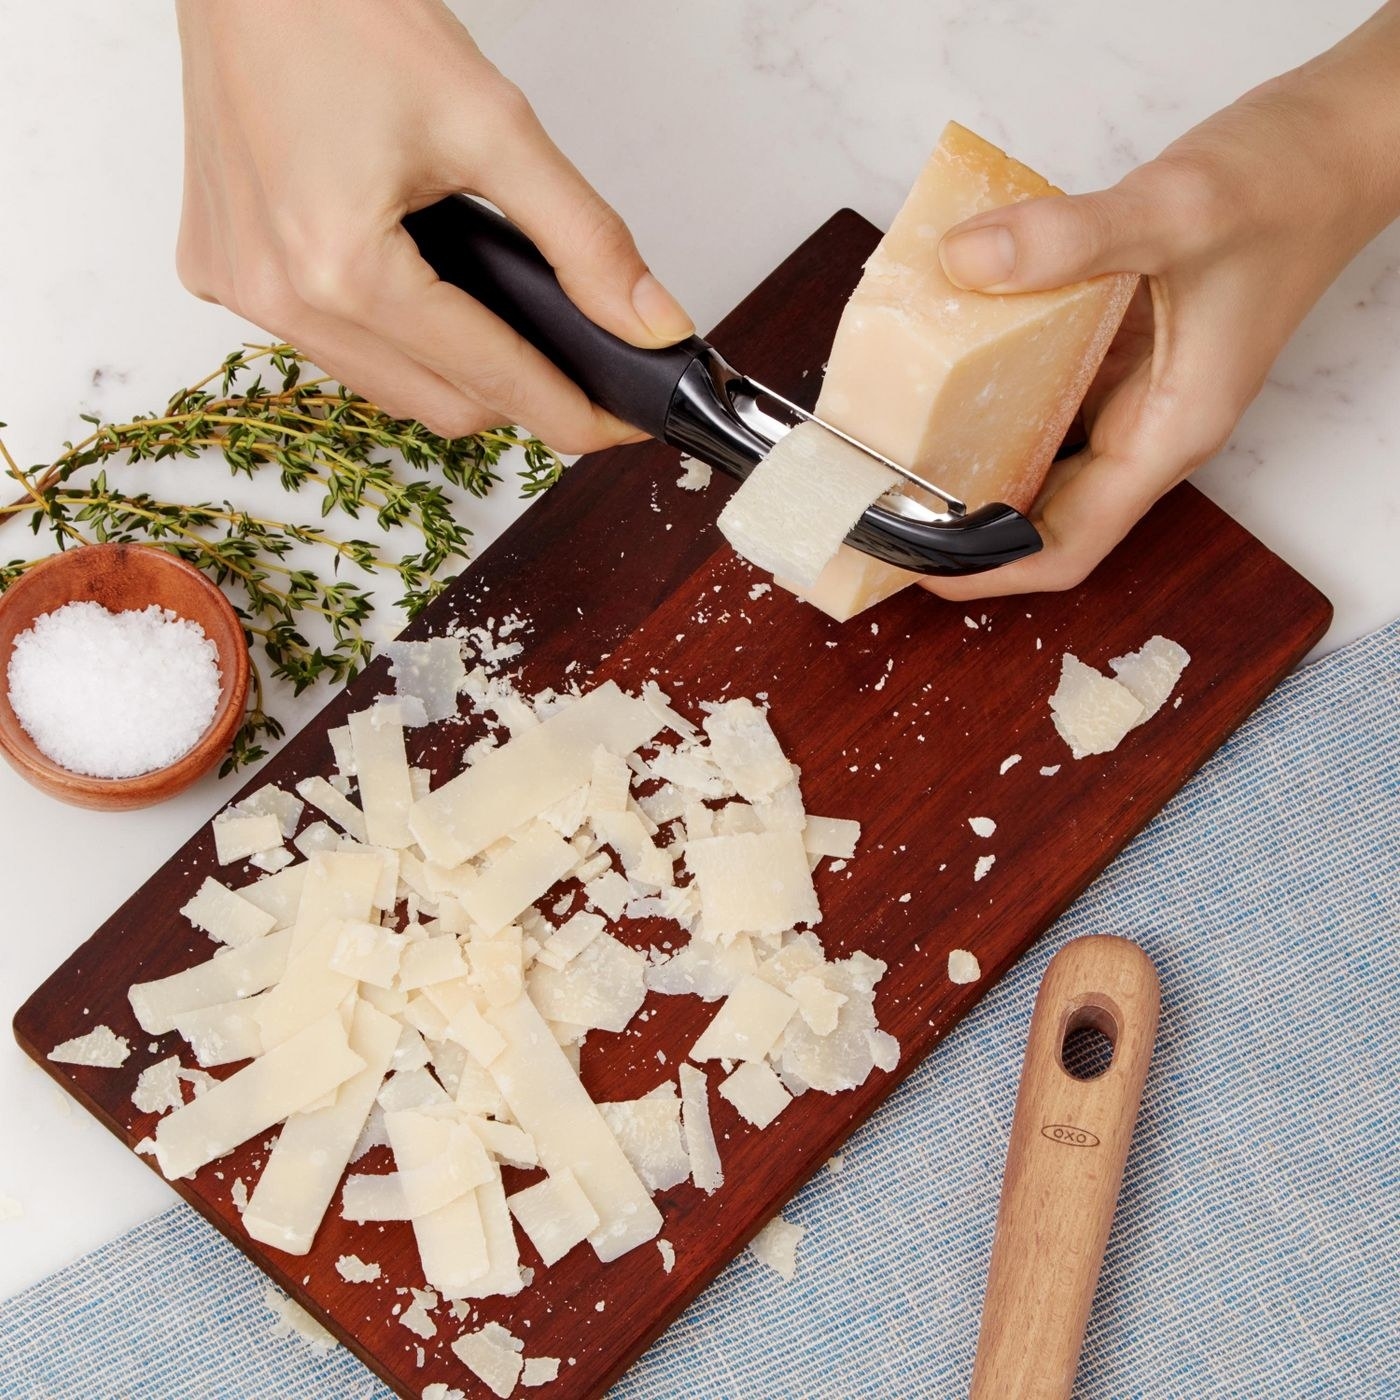 Model using peeler to slice off cheese